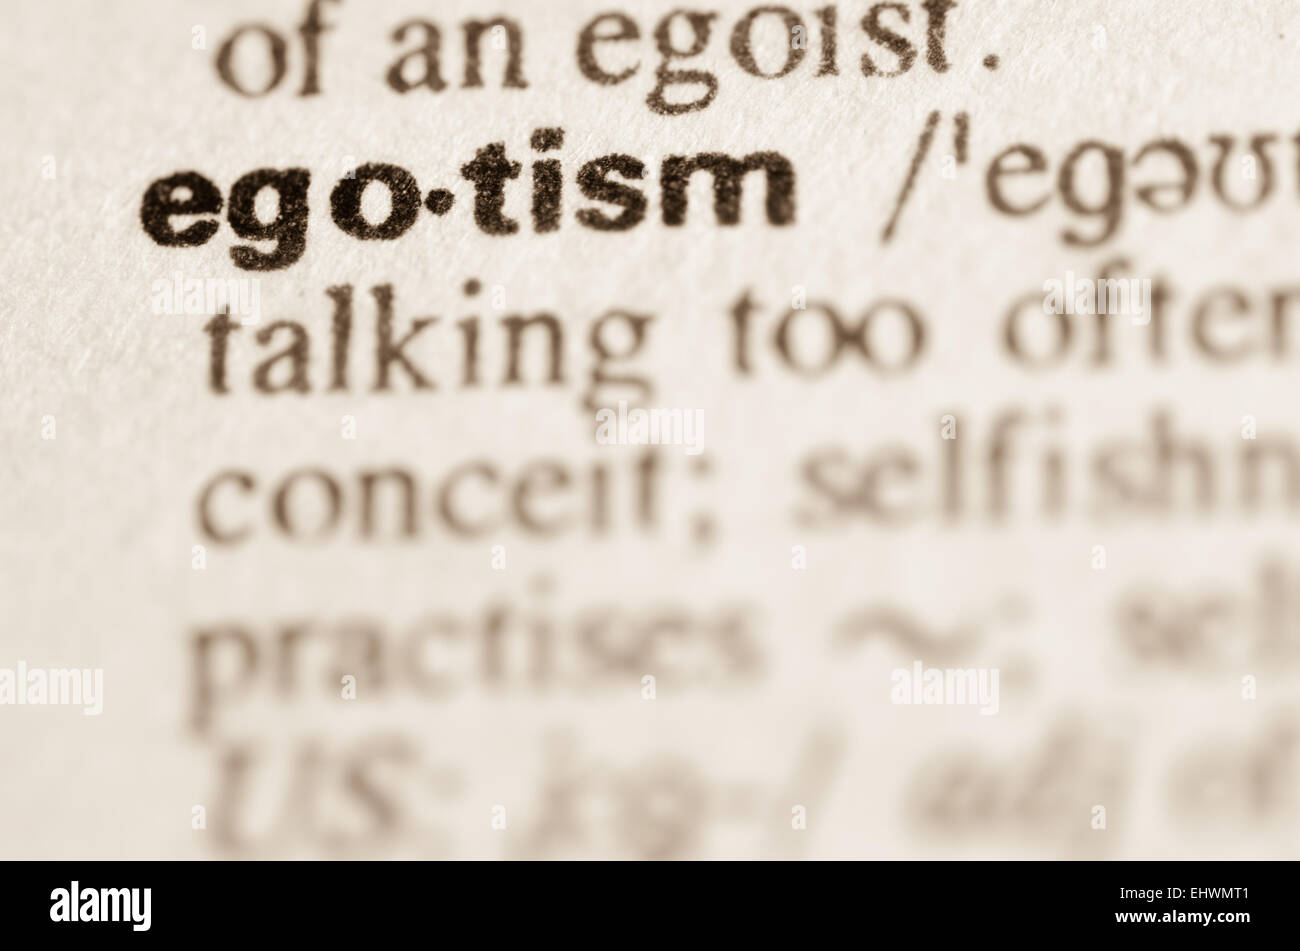 Definition of word egotism in dictionary Stock Photo